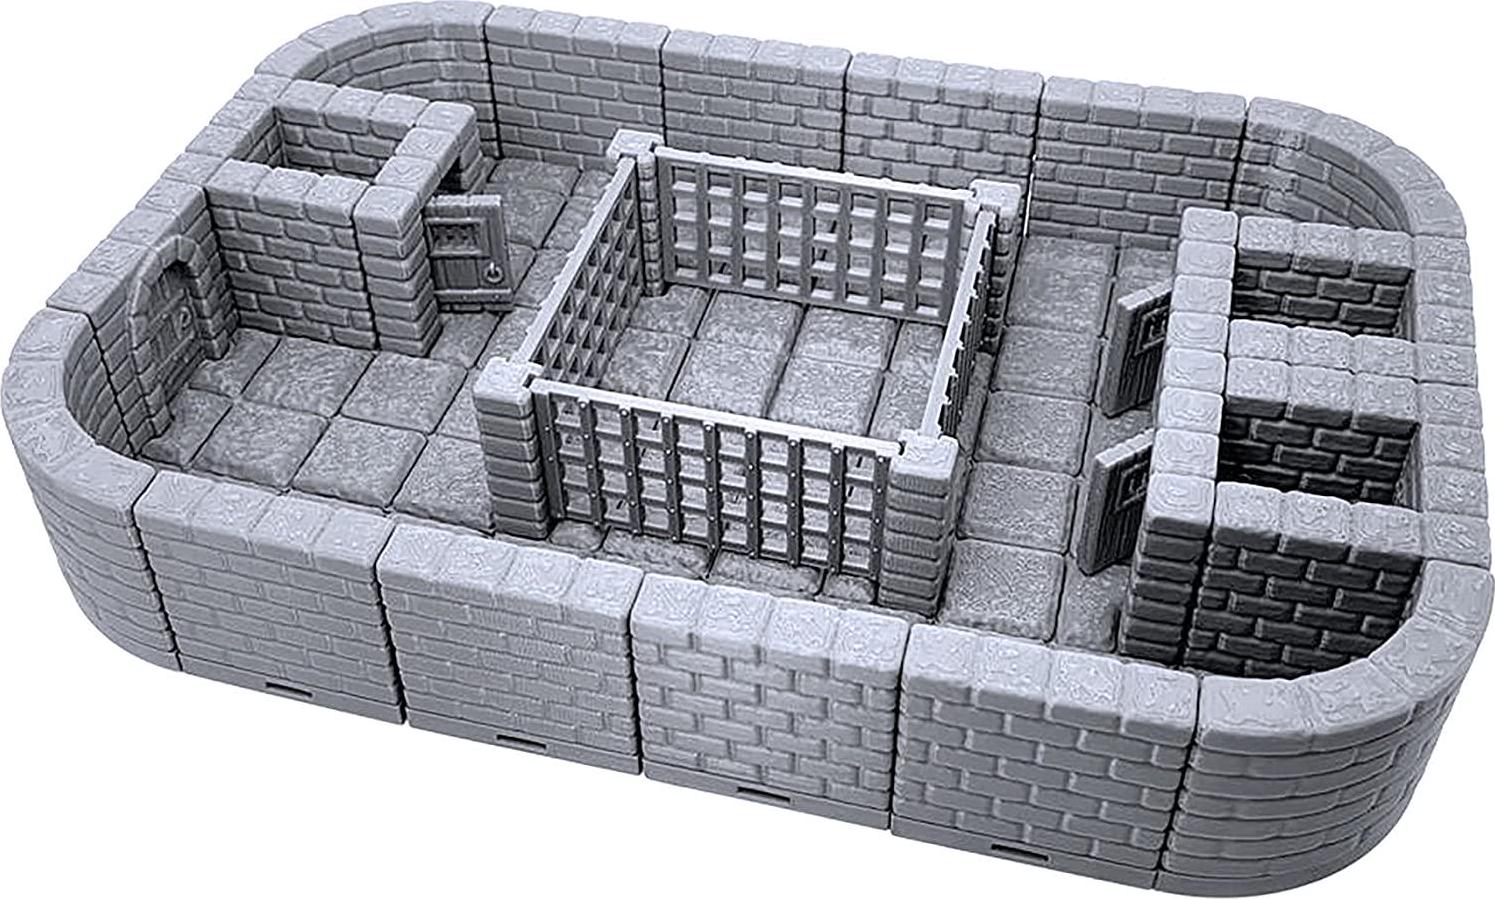 EnderToys, Locking Dungeon Tiles - Prison Pit, Paintable 3D Printed Tabletop Role Playing Game Terrain Scenery for 28mm Miniatures